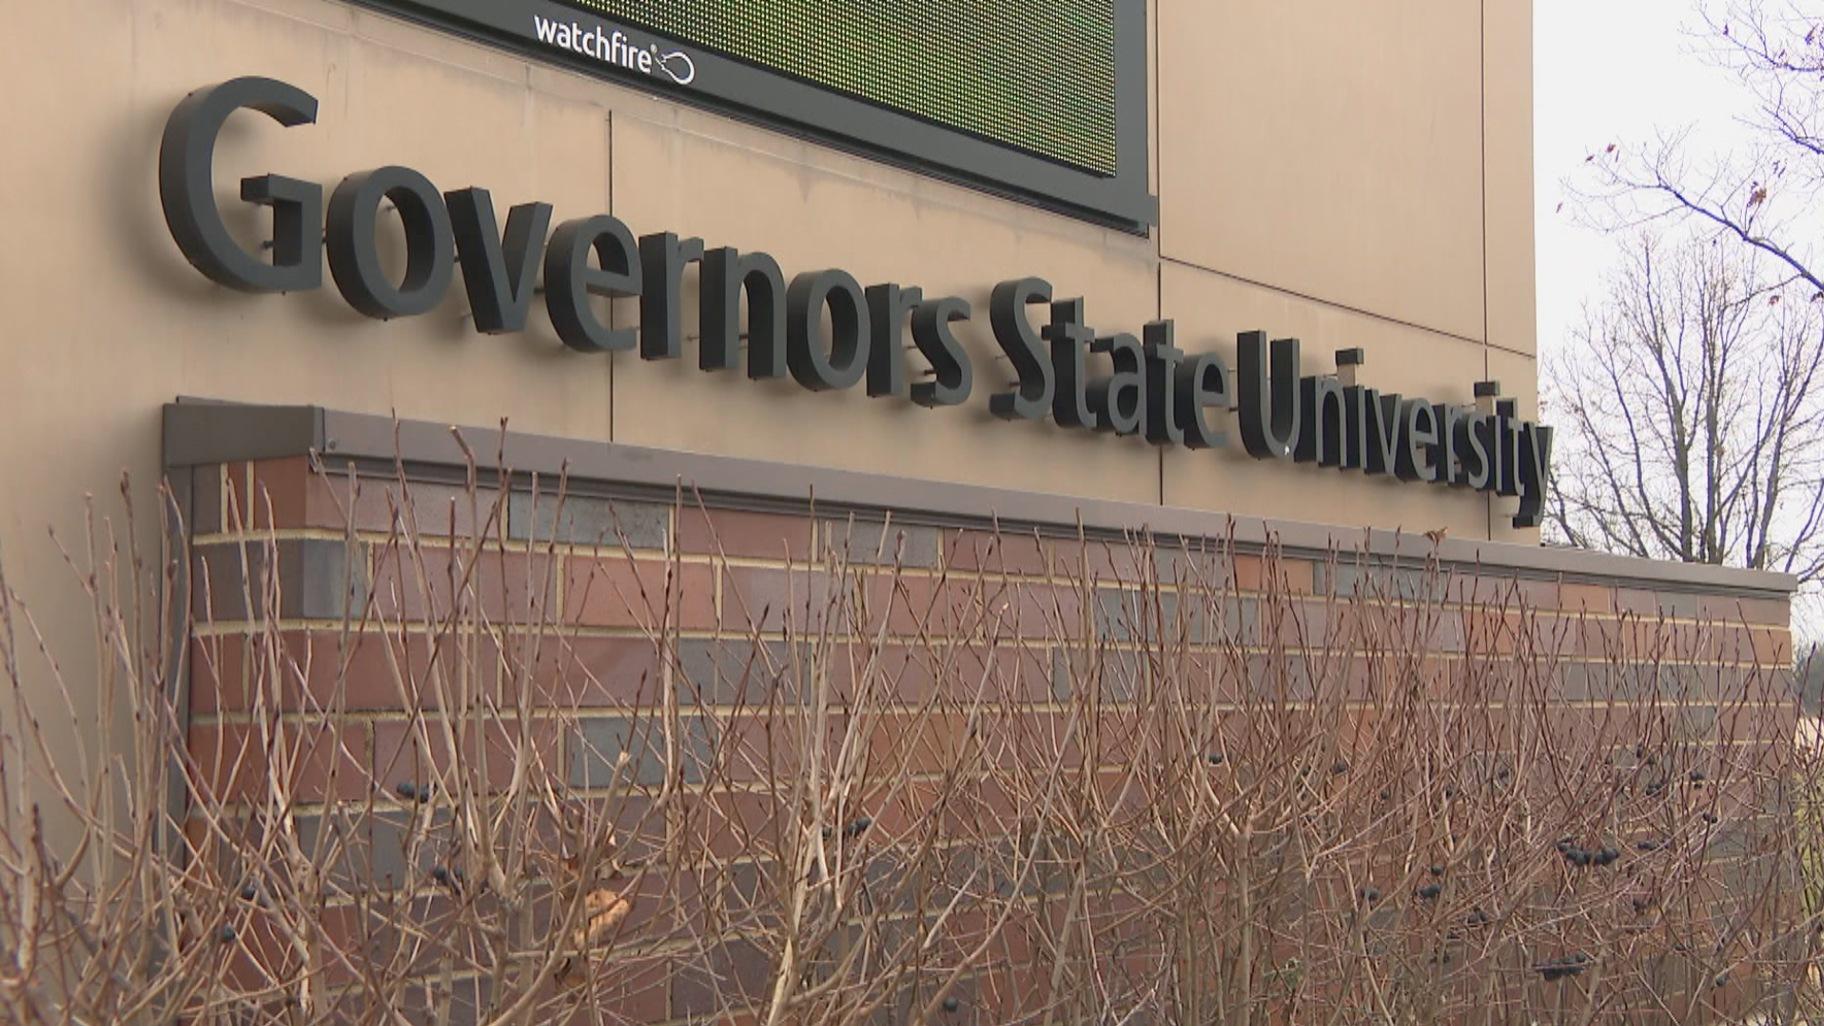 Governors State University Faculty and Staff Go on Strike, Joining